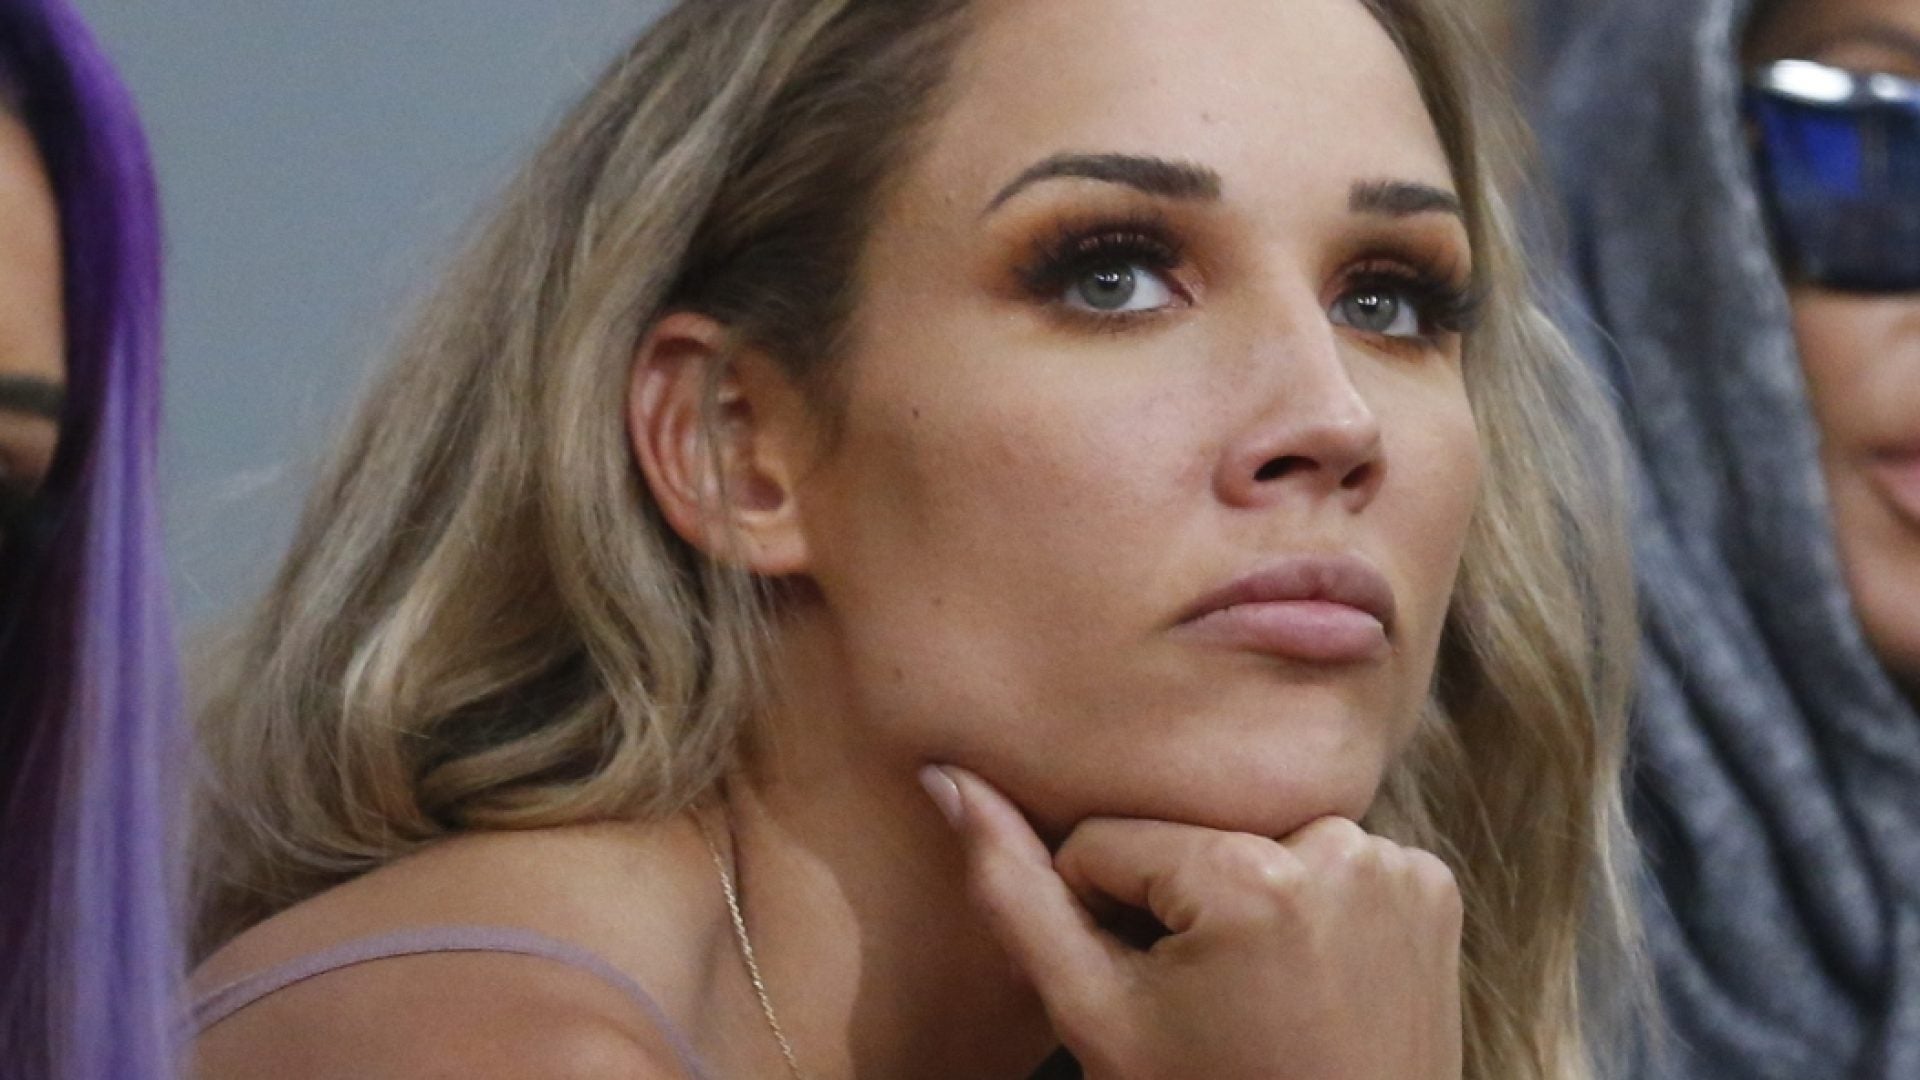 Lolo Jones Vents About How Hard It Is To Find Love As A Virgin: 'I Just Keep Getting My Heart Broke'